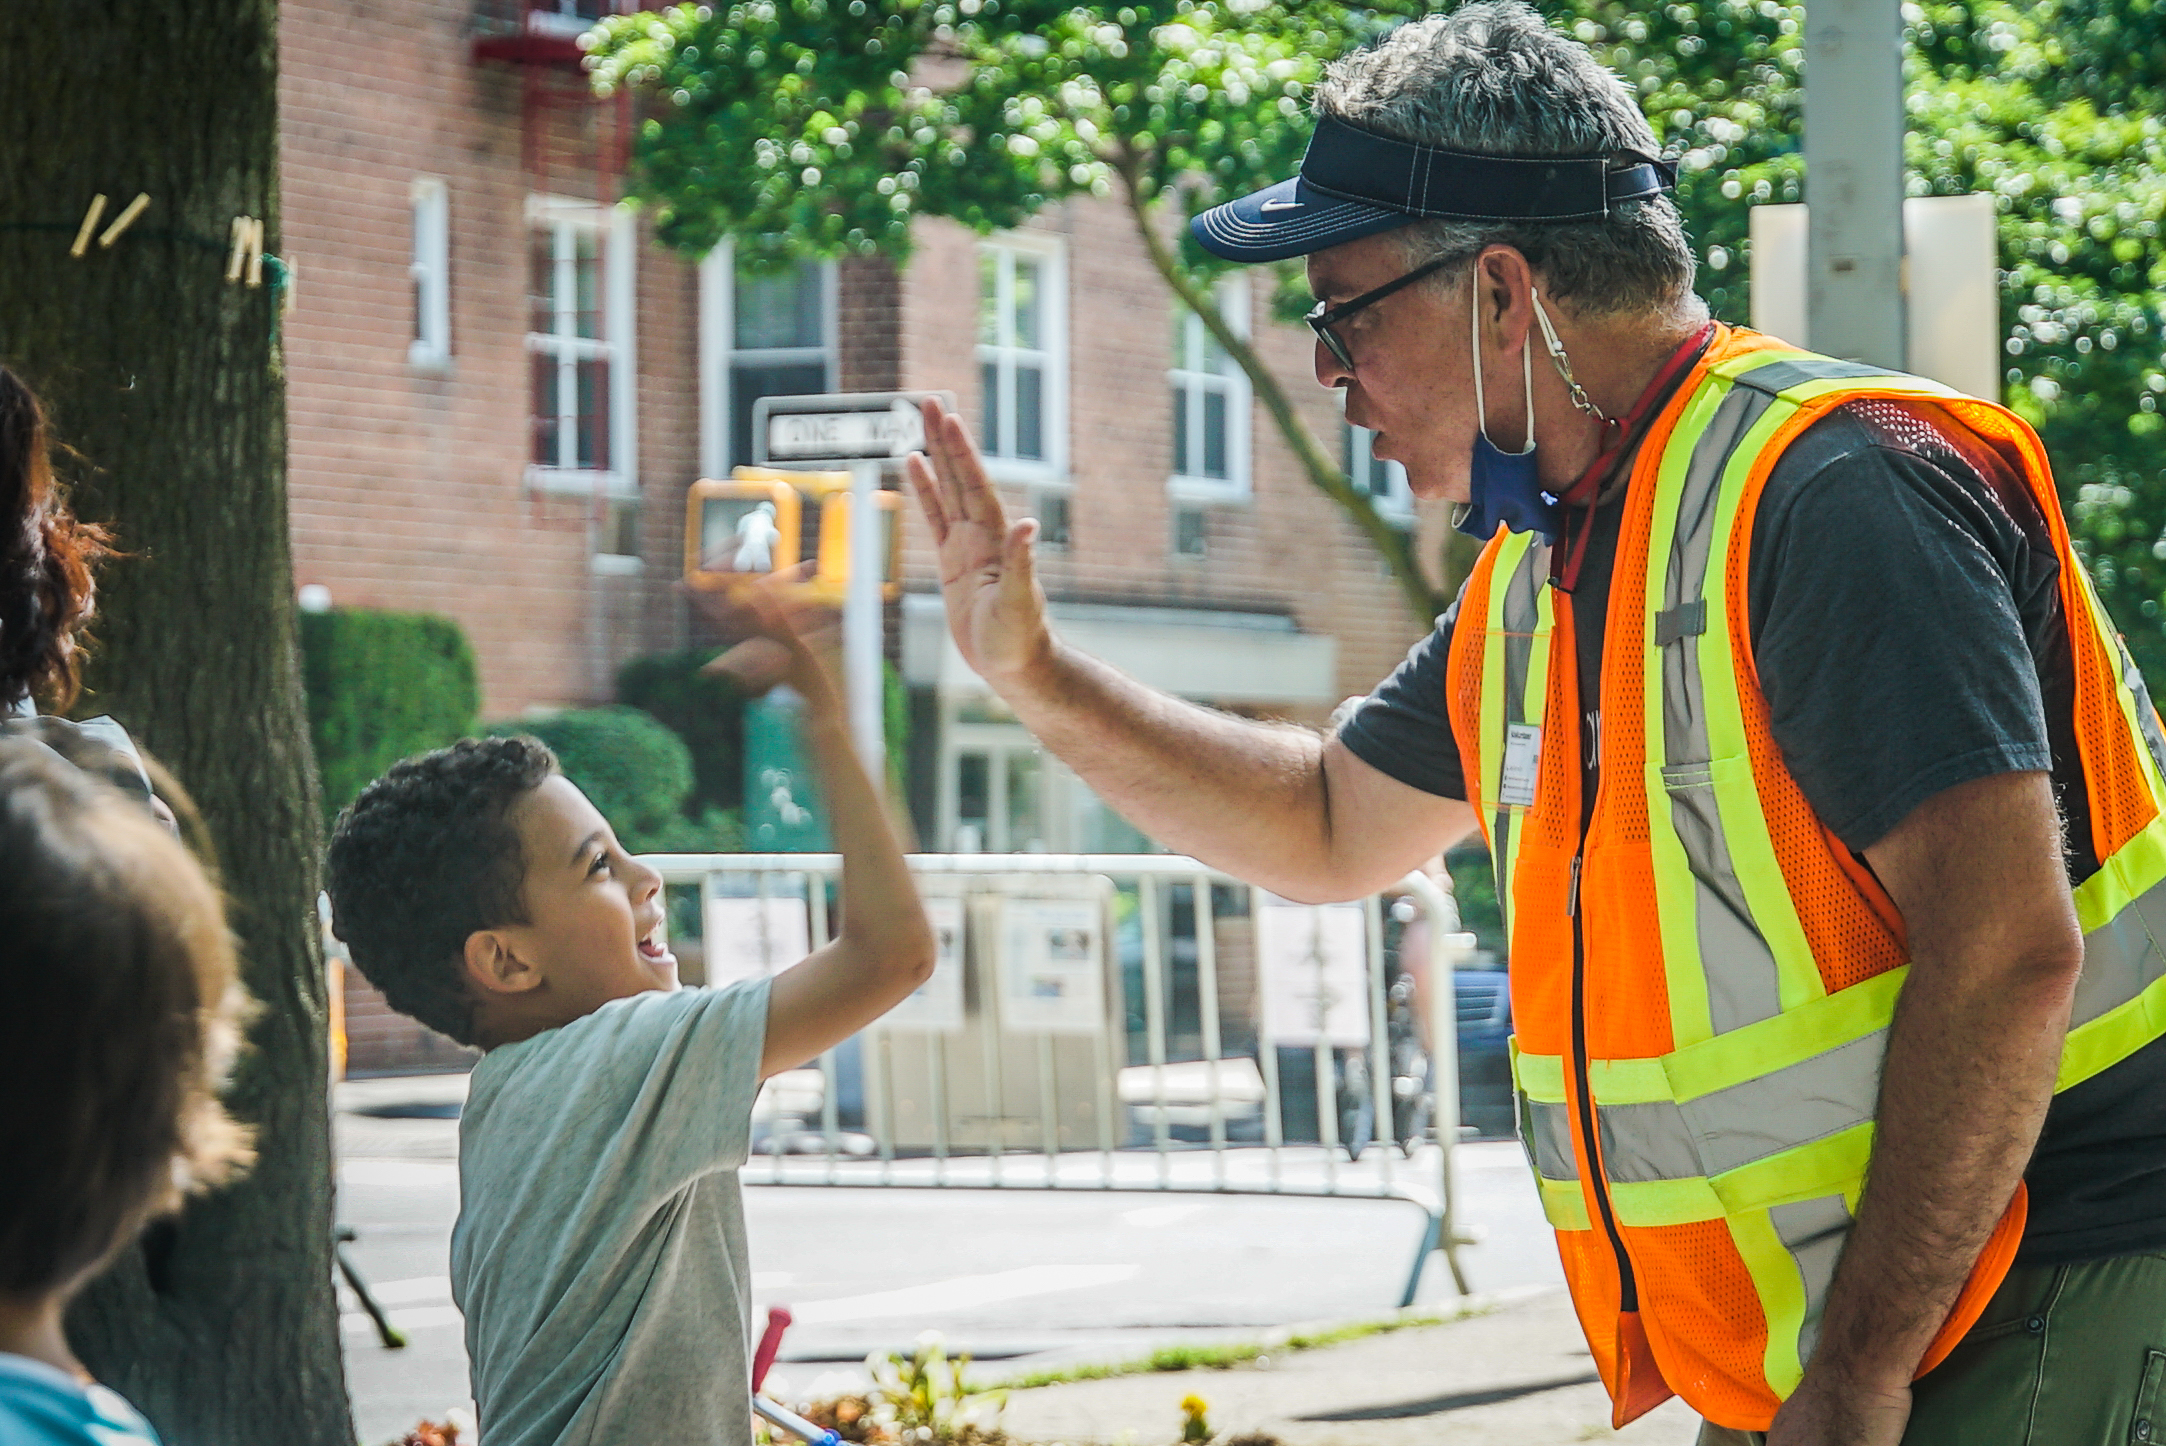 On a sunny day on the Open Street, a young boy with a big smile jumps up to slap Jim a high five.